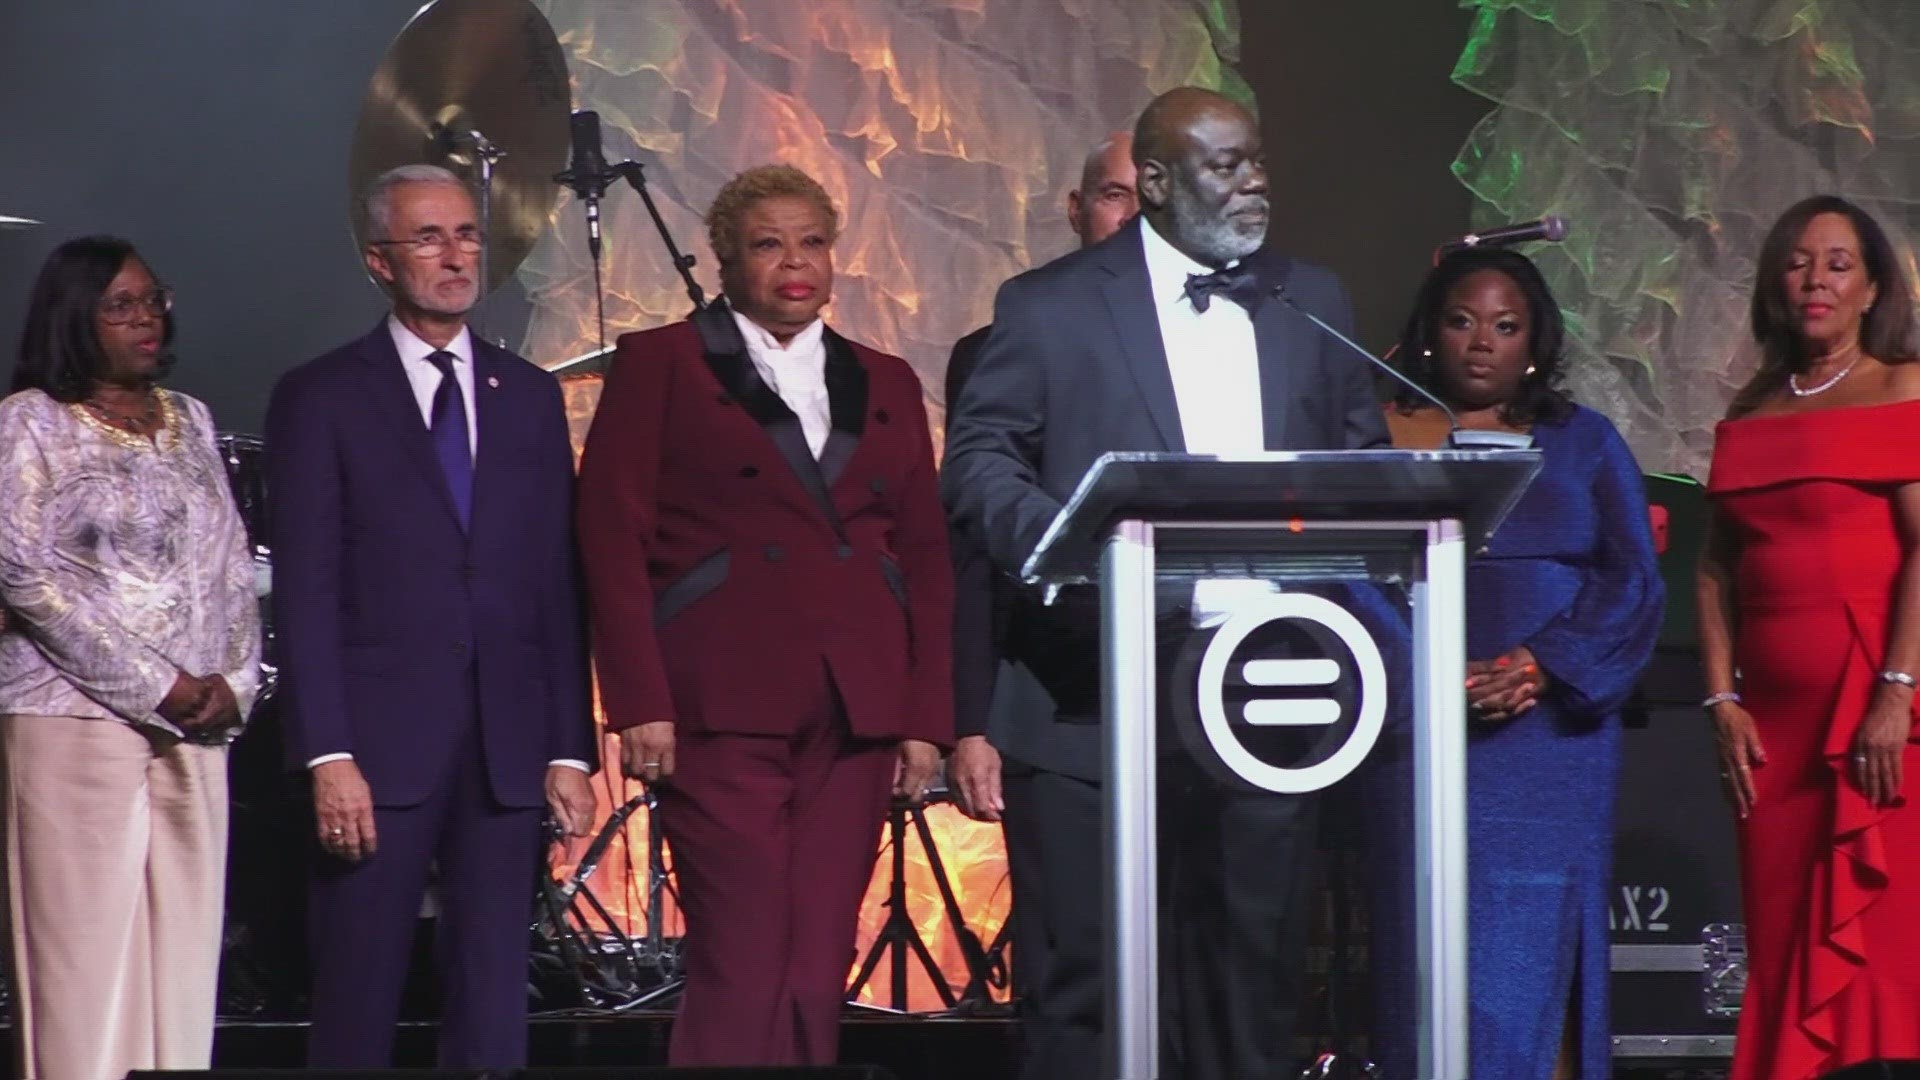 The Knoxville Area Urban League said the event had sold out and was their largest gala yet.